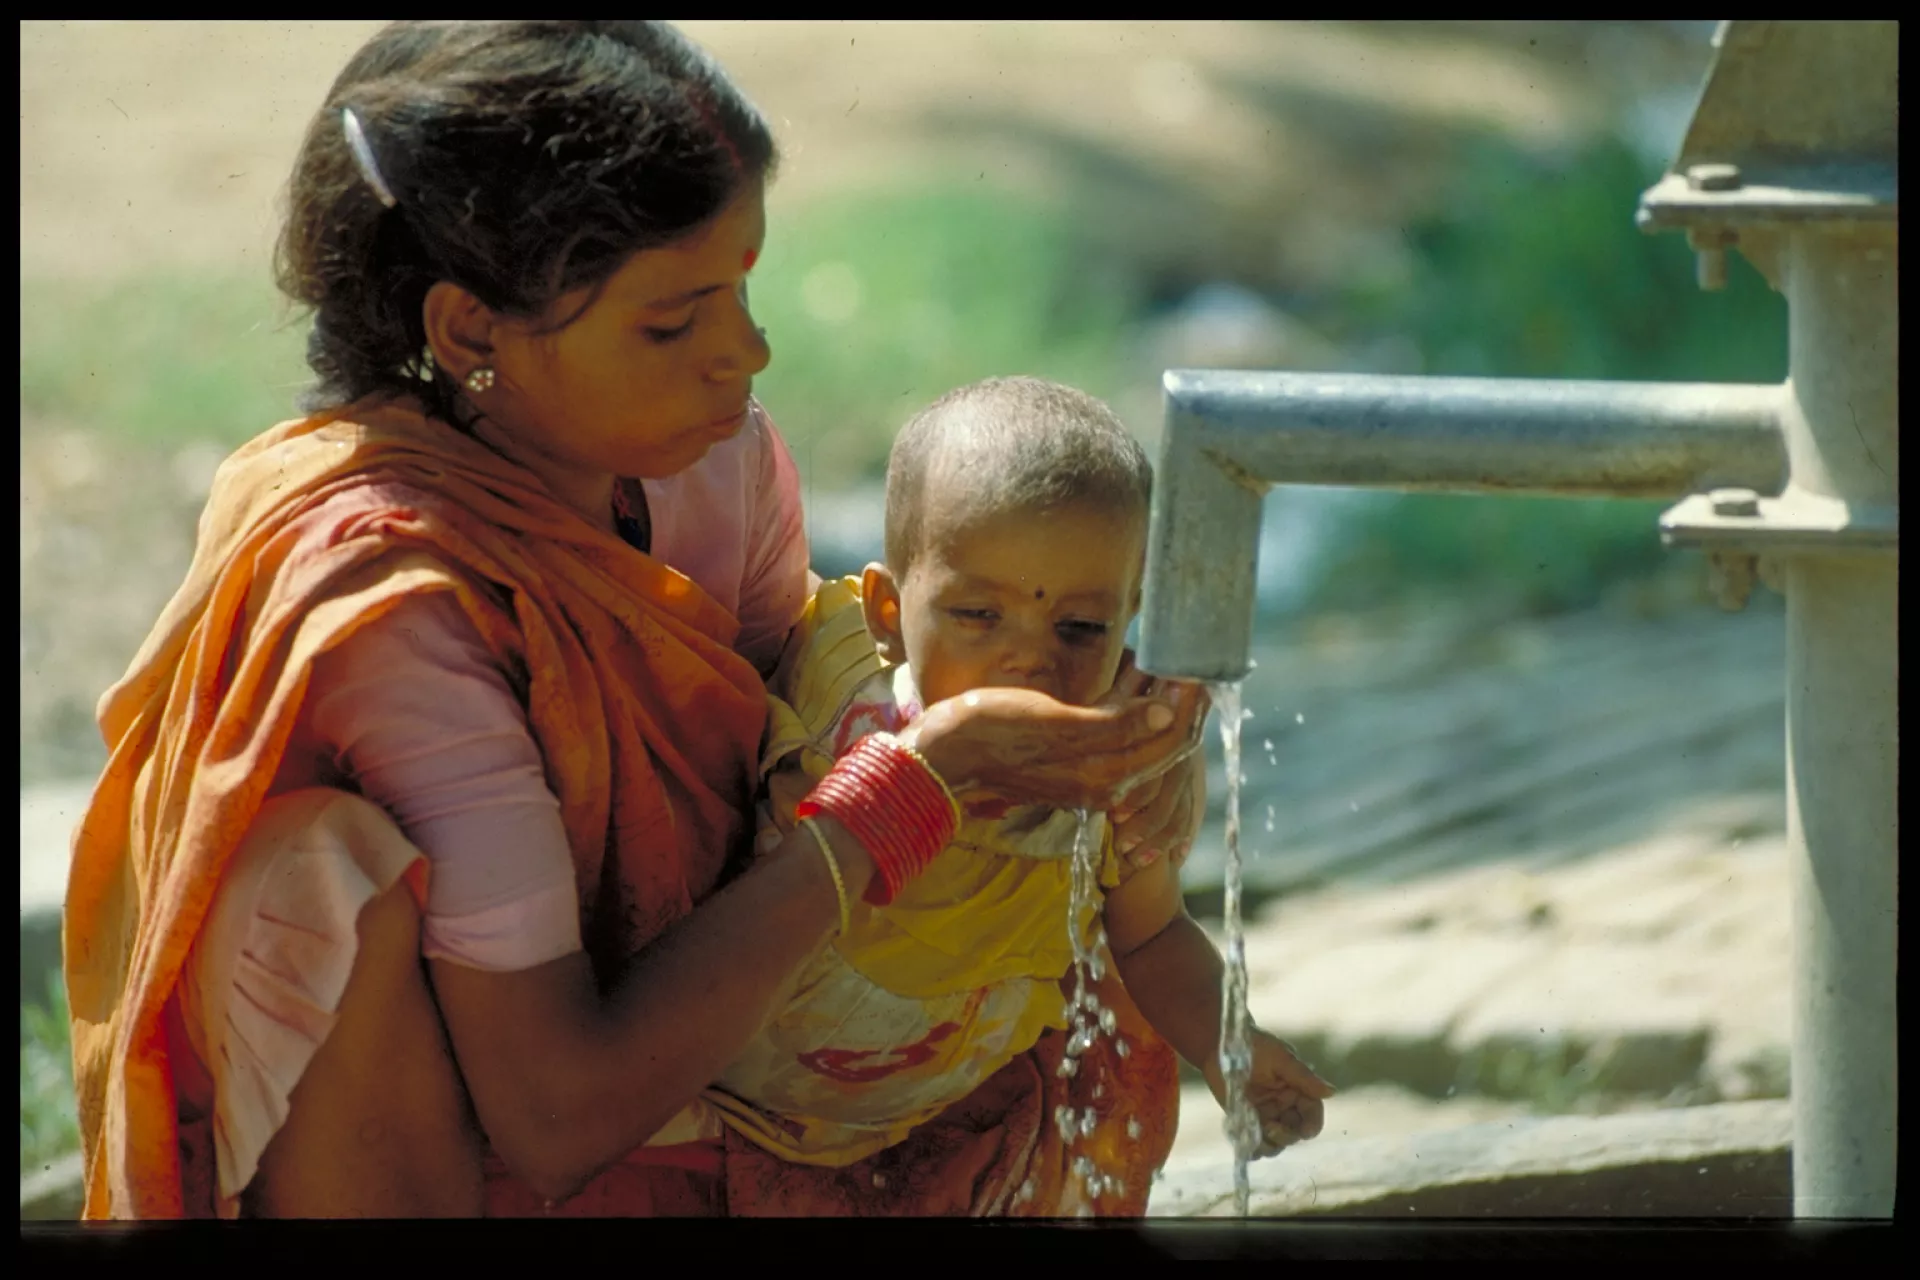 A mother giving her baby water from a water pipe.